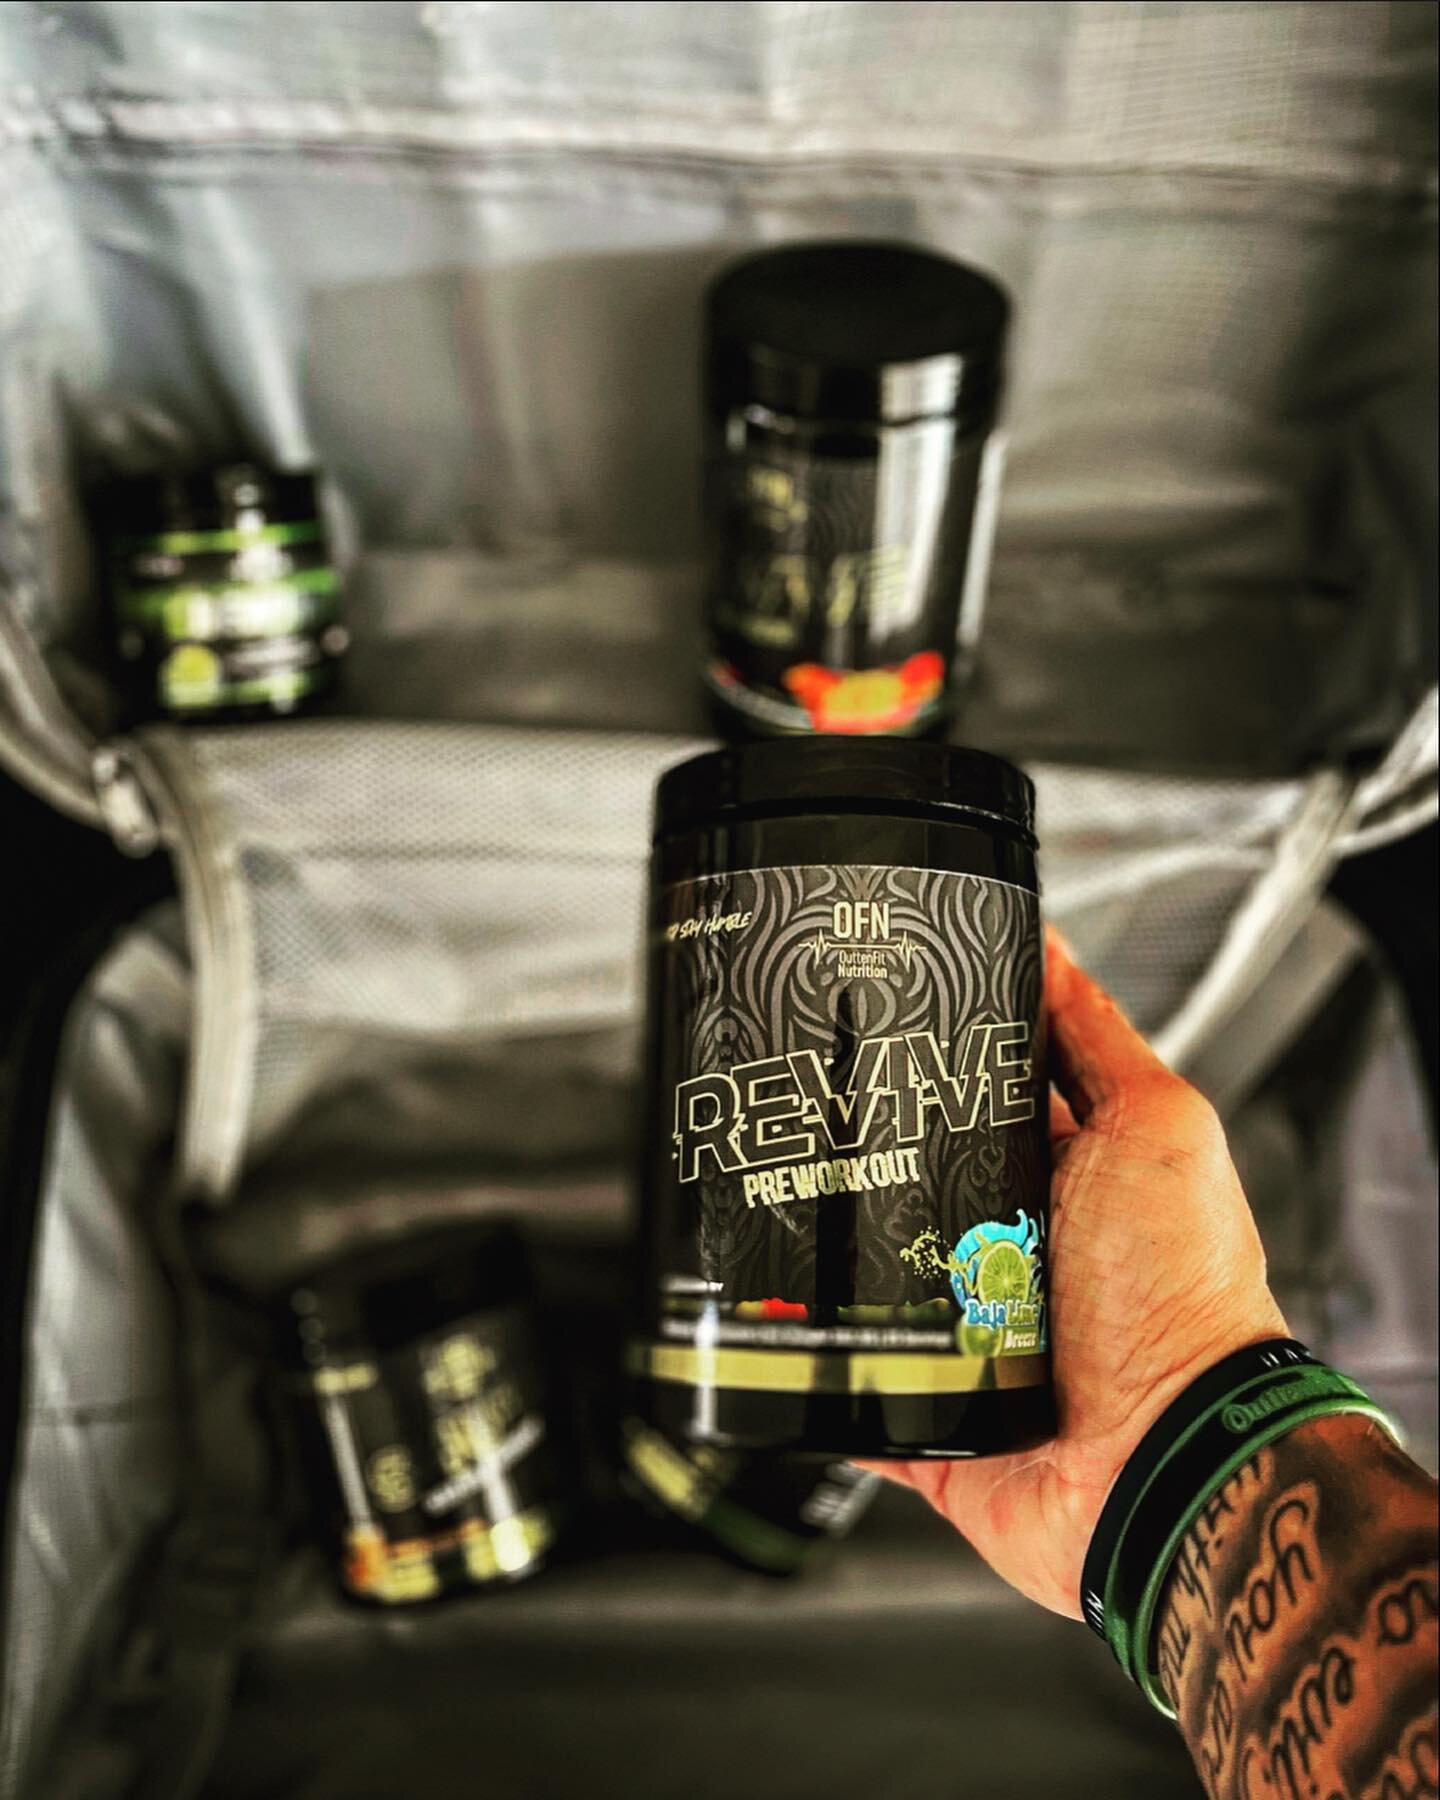 Traveling for the holidays? Don&rsquo;t forget to bring your favorite supps to stay on the grind and still enjoy yourself. 
.

We know fan favorite Rewind will be a use to many of you 😉
.

Have a safe and fun holiday with the fam and friends! 
.

Wo